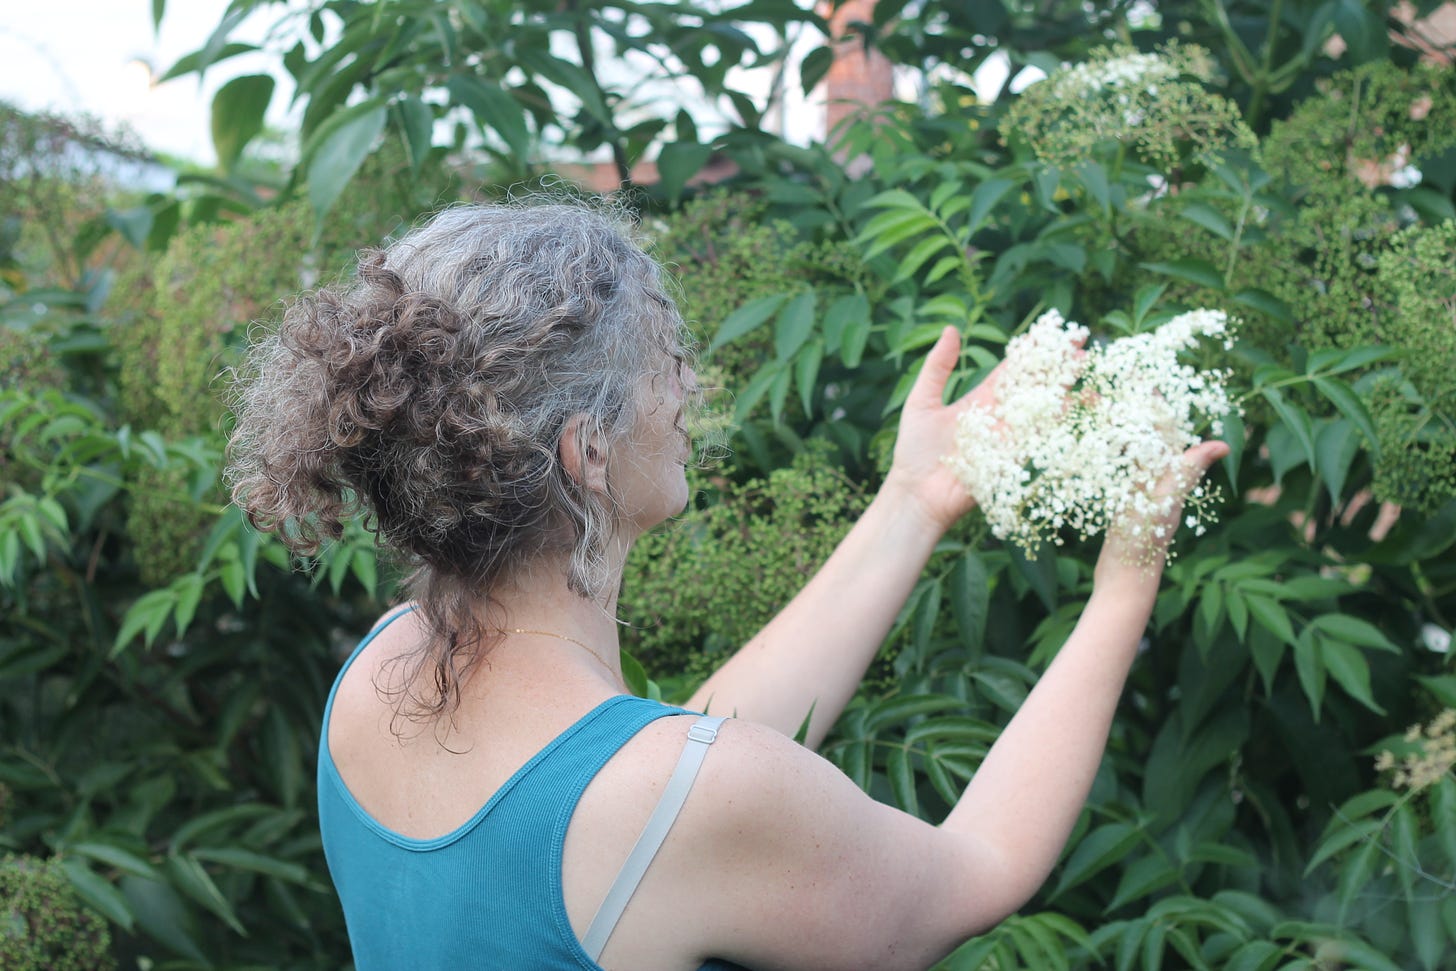 A white woman with grey curly hair in a ponytail holds a big, white, flat elderberry blossom between her two hands